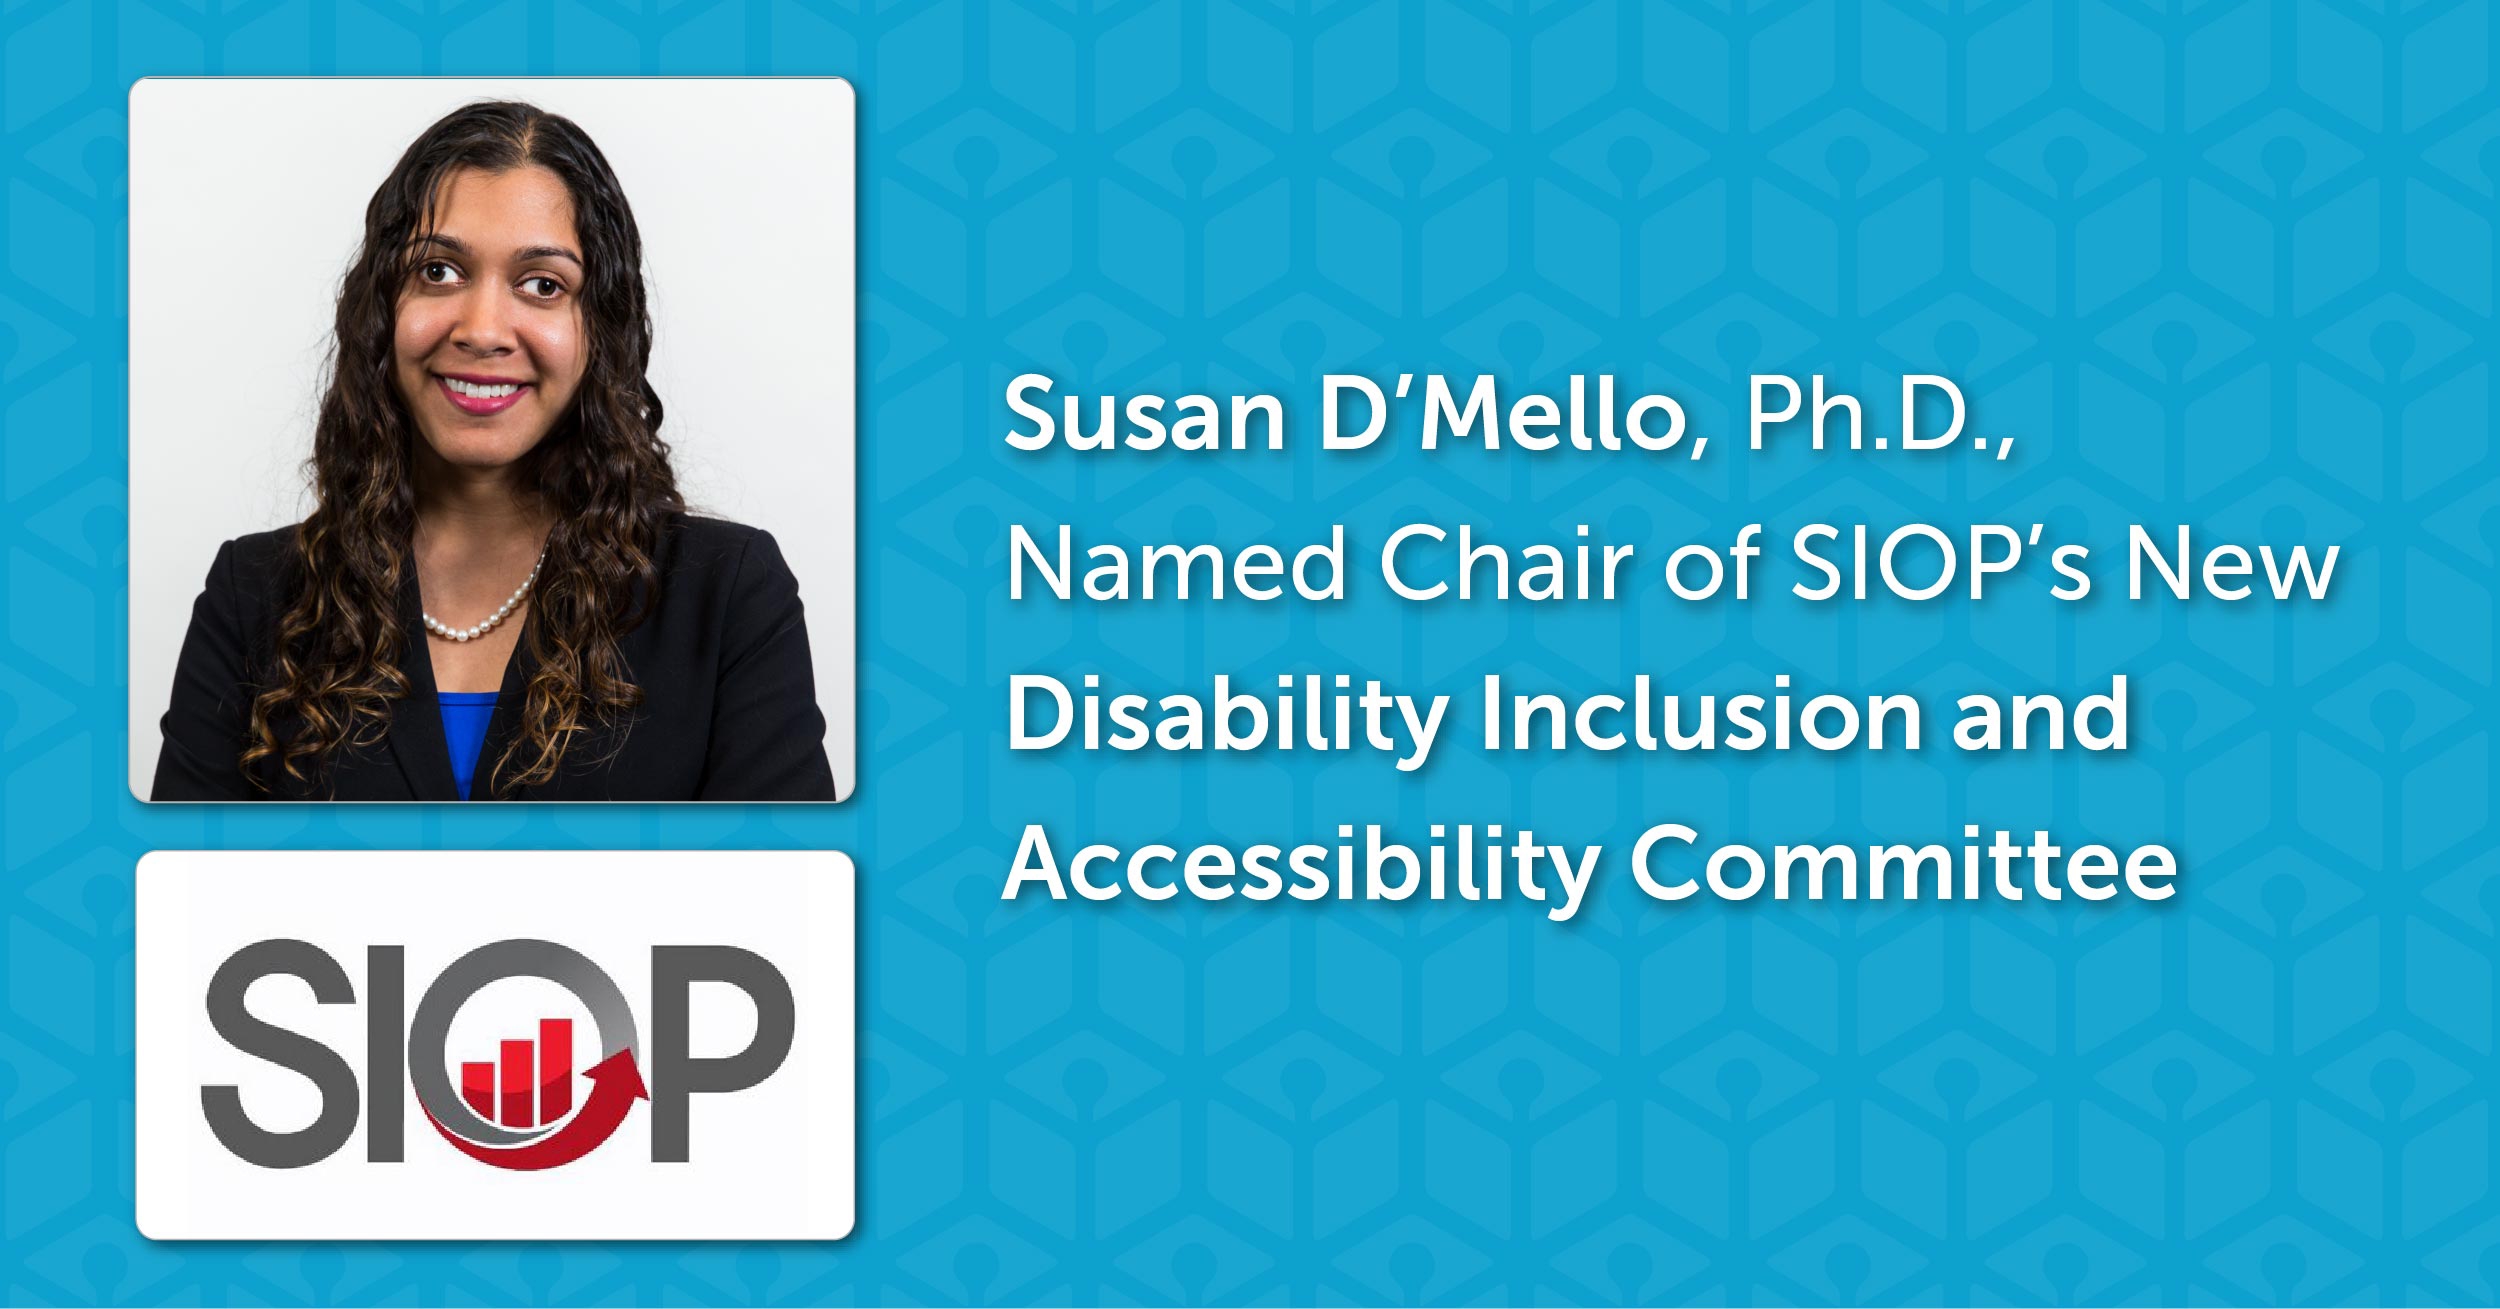 HumRRO encourages staff to volunteer for professional organizations, such as SIOP, PTCMW, Blacks in I/O, and APA, to advance the I-O field and its professionals. Susan D'Mello, Ph.D., founded and chairs SIOP's Disability Inclusion and Accessibility Committee.